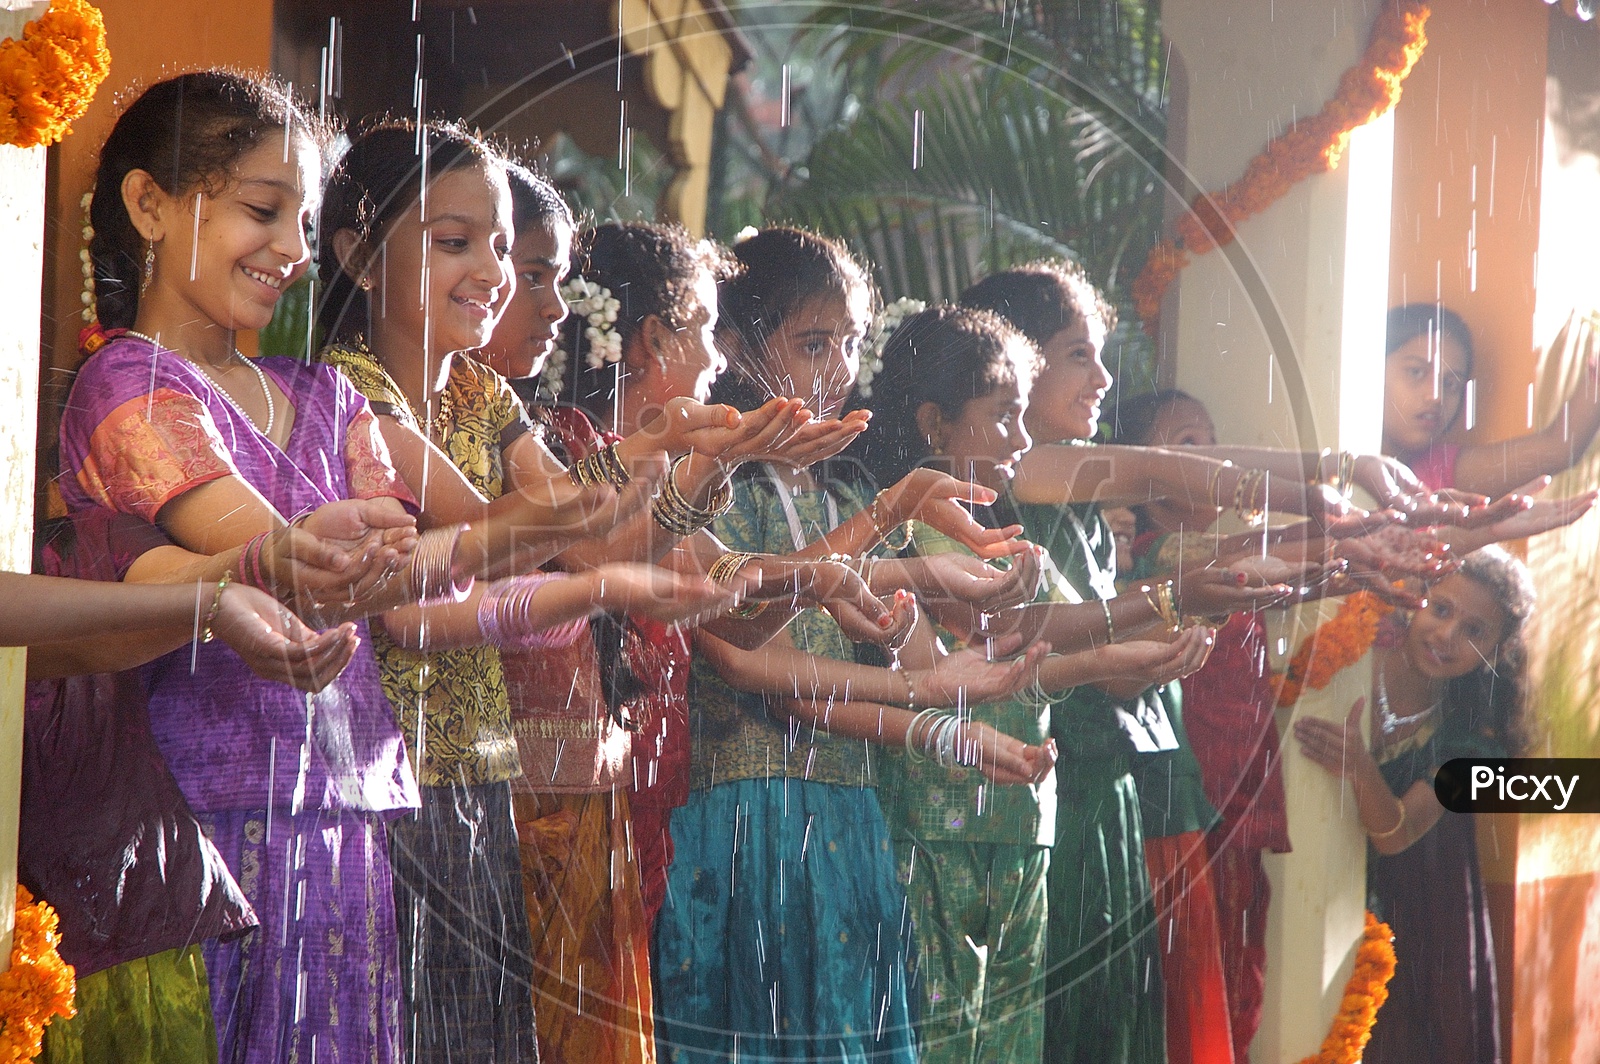 Indian Girl Children In Traditional Dresses in a Movie Shooting